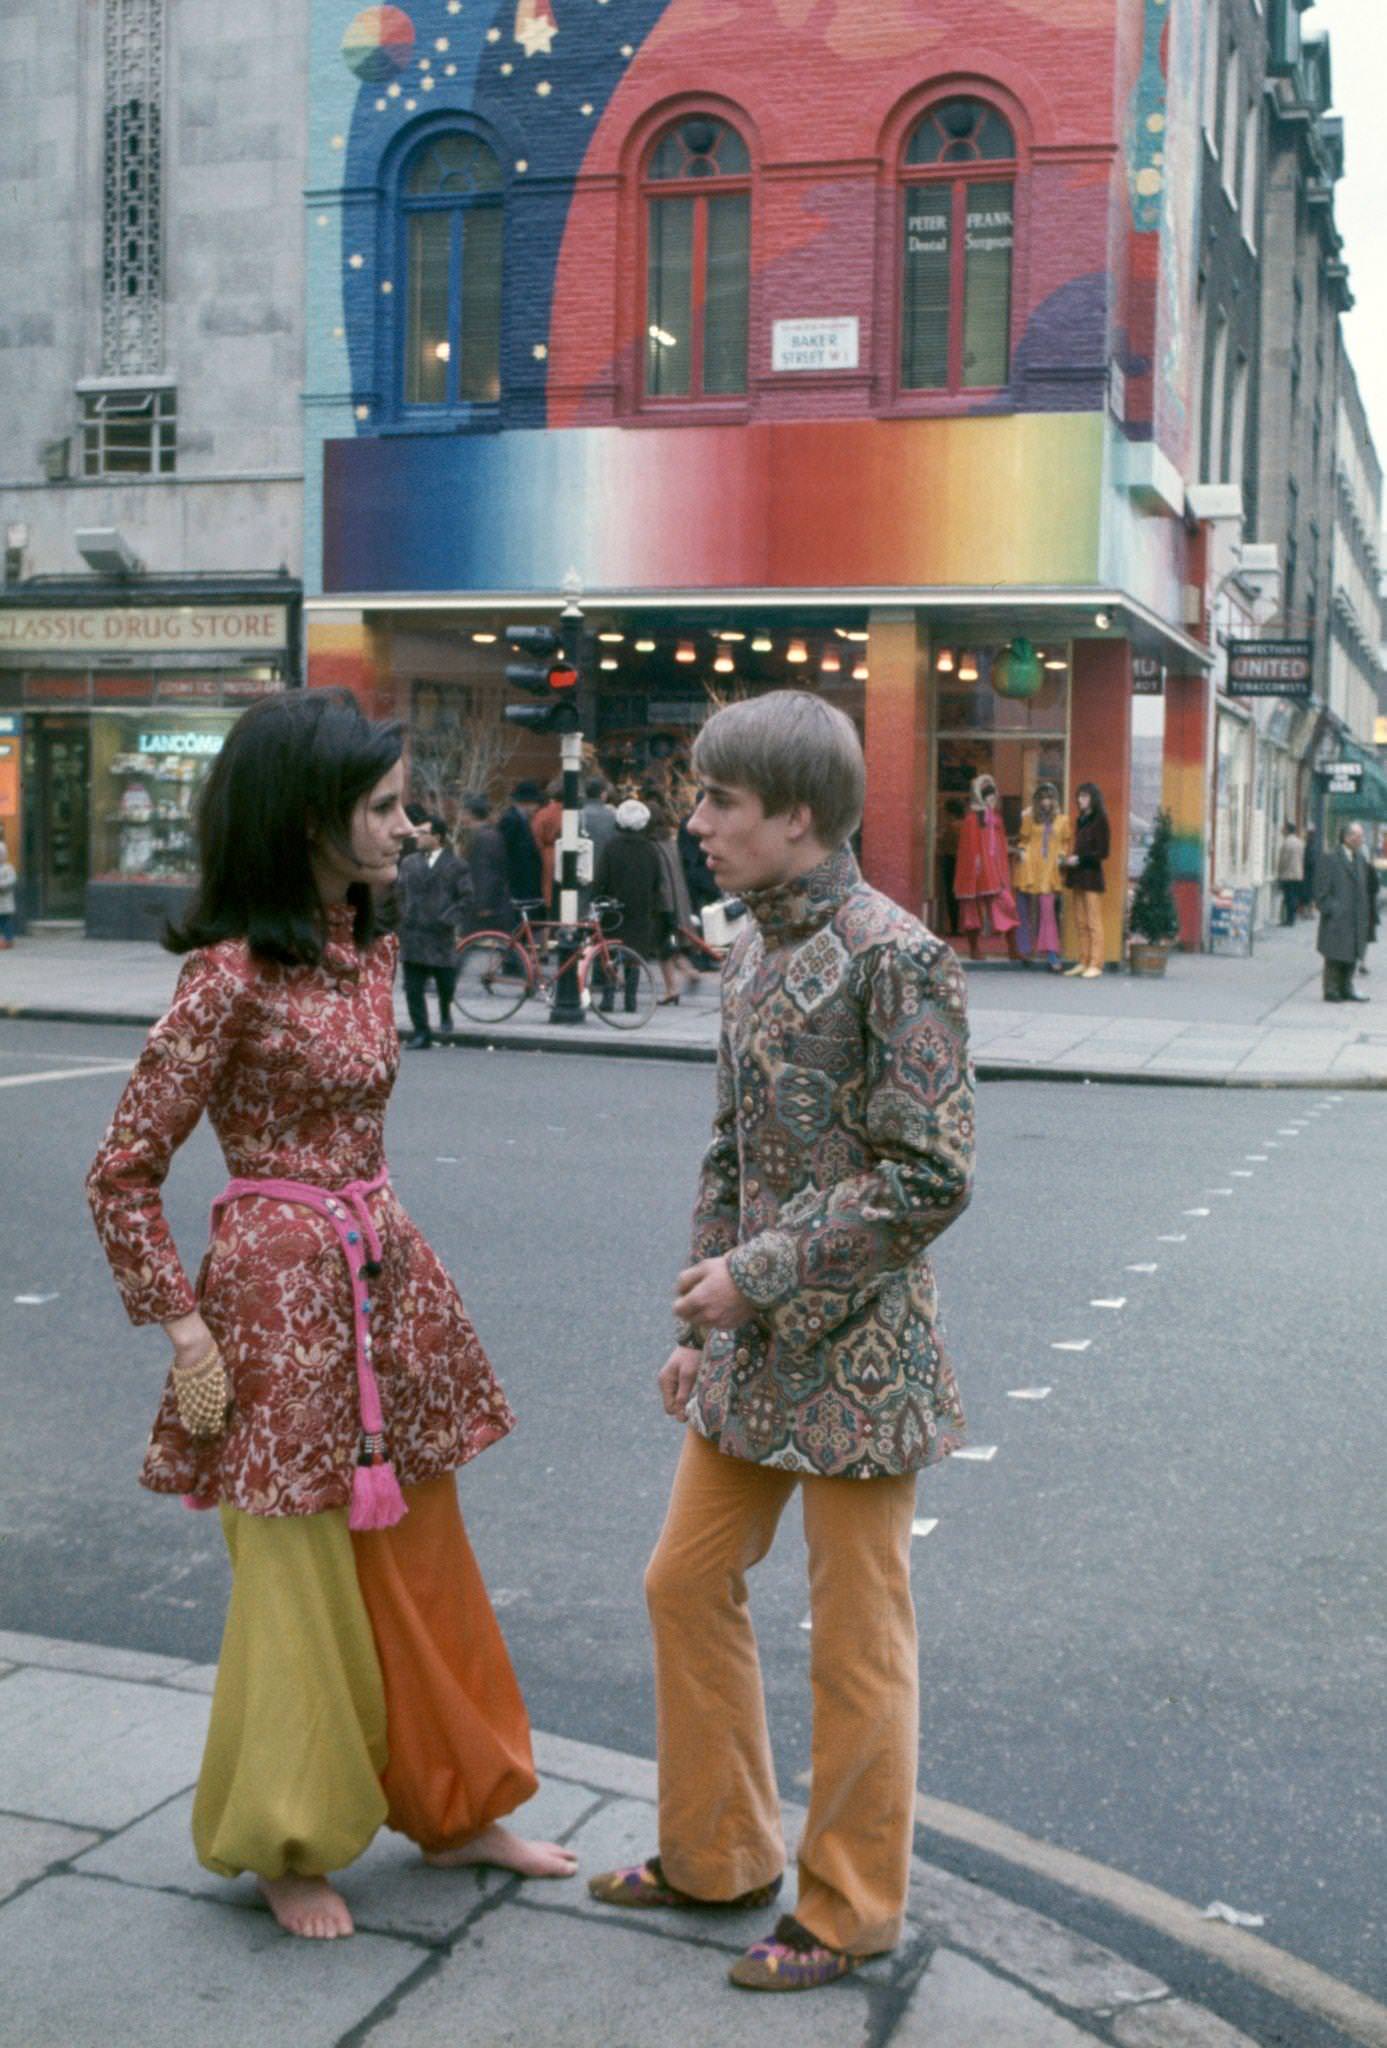 Two hippies standing outside the Apple Boutique, a retail store founded by The Beatles as part of their Apple Corps business venture, London, 1967